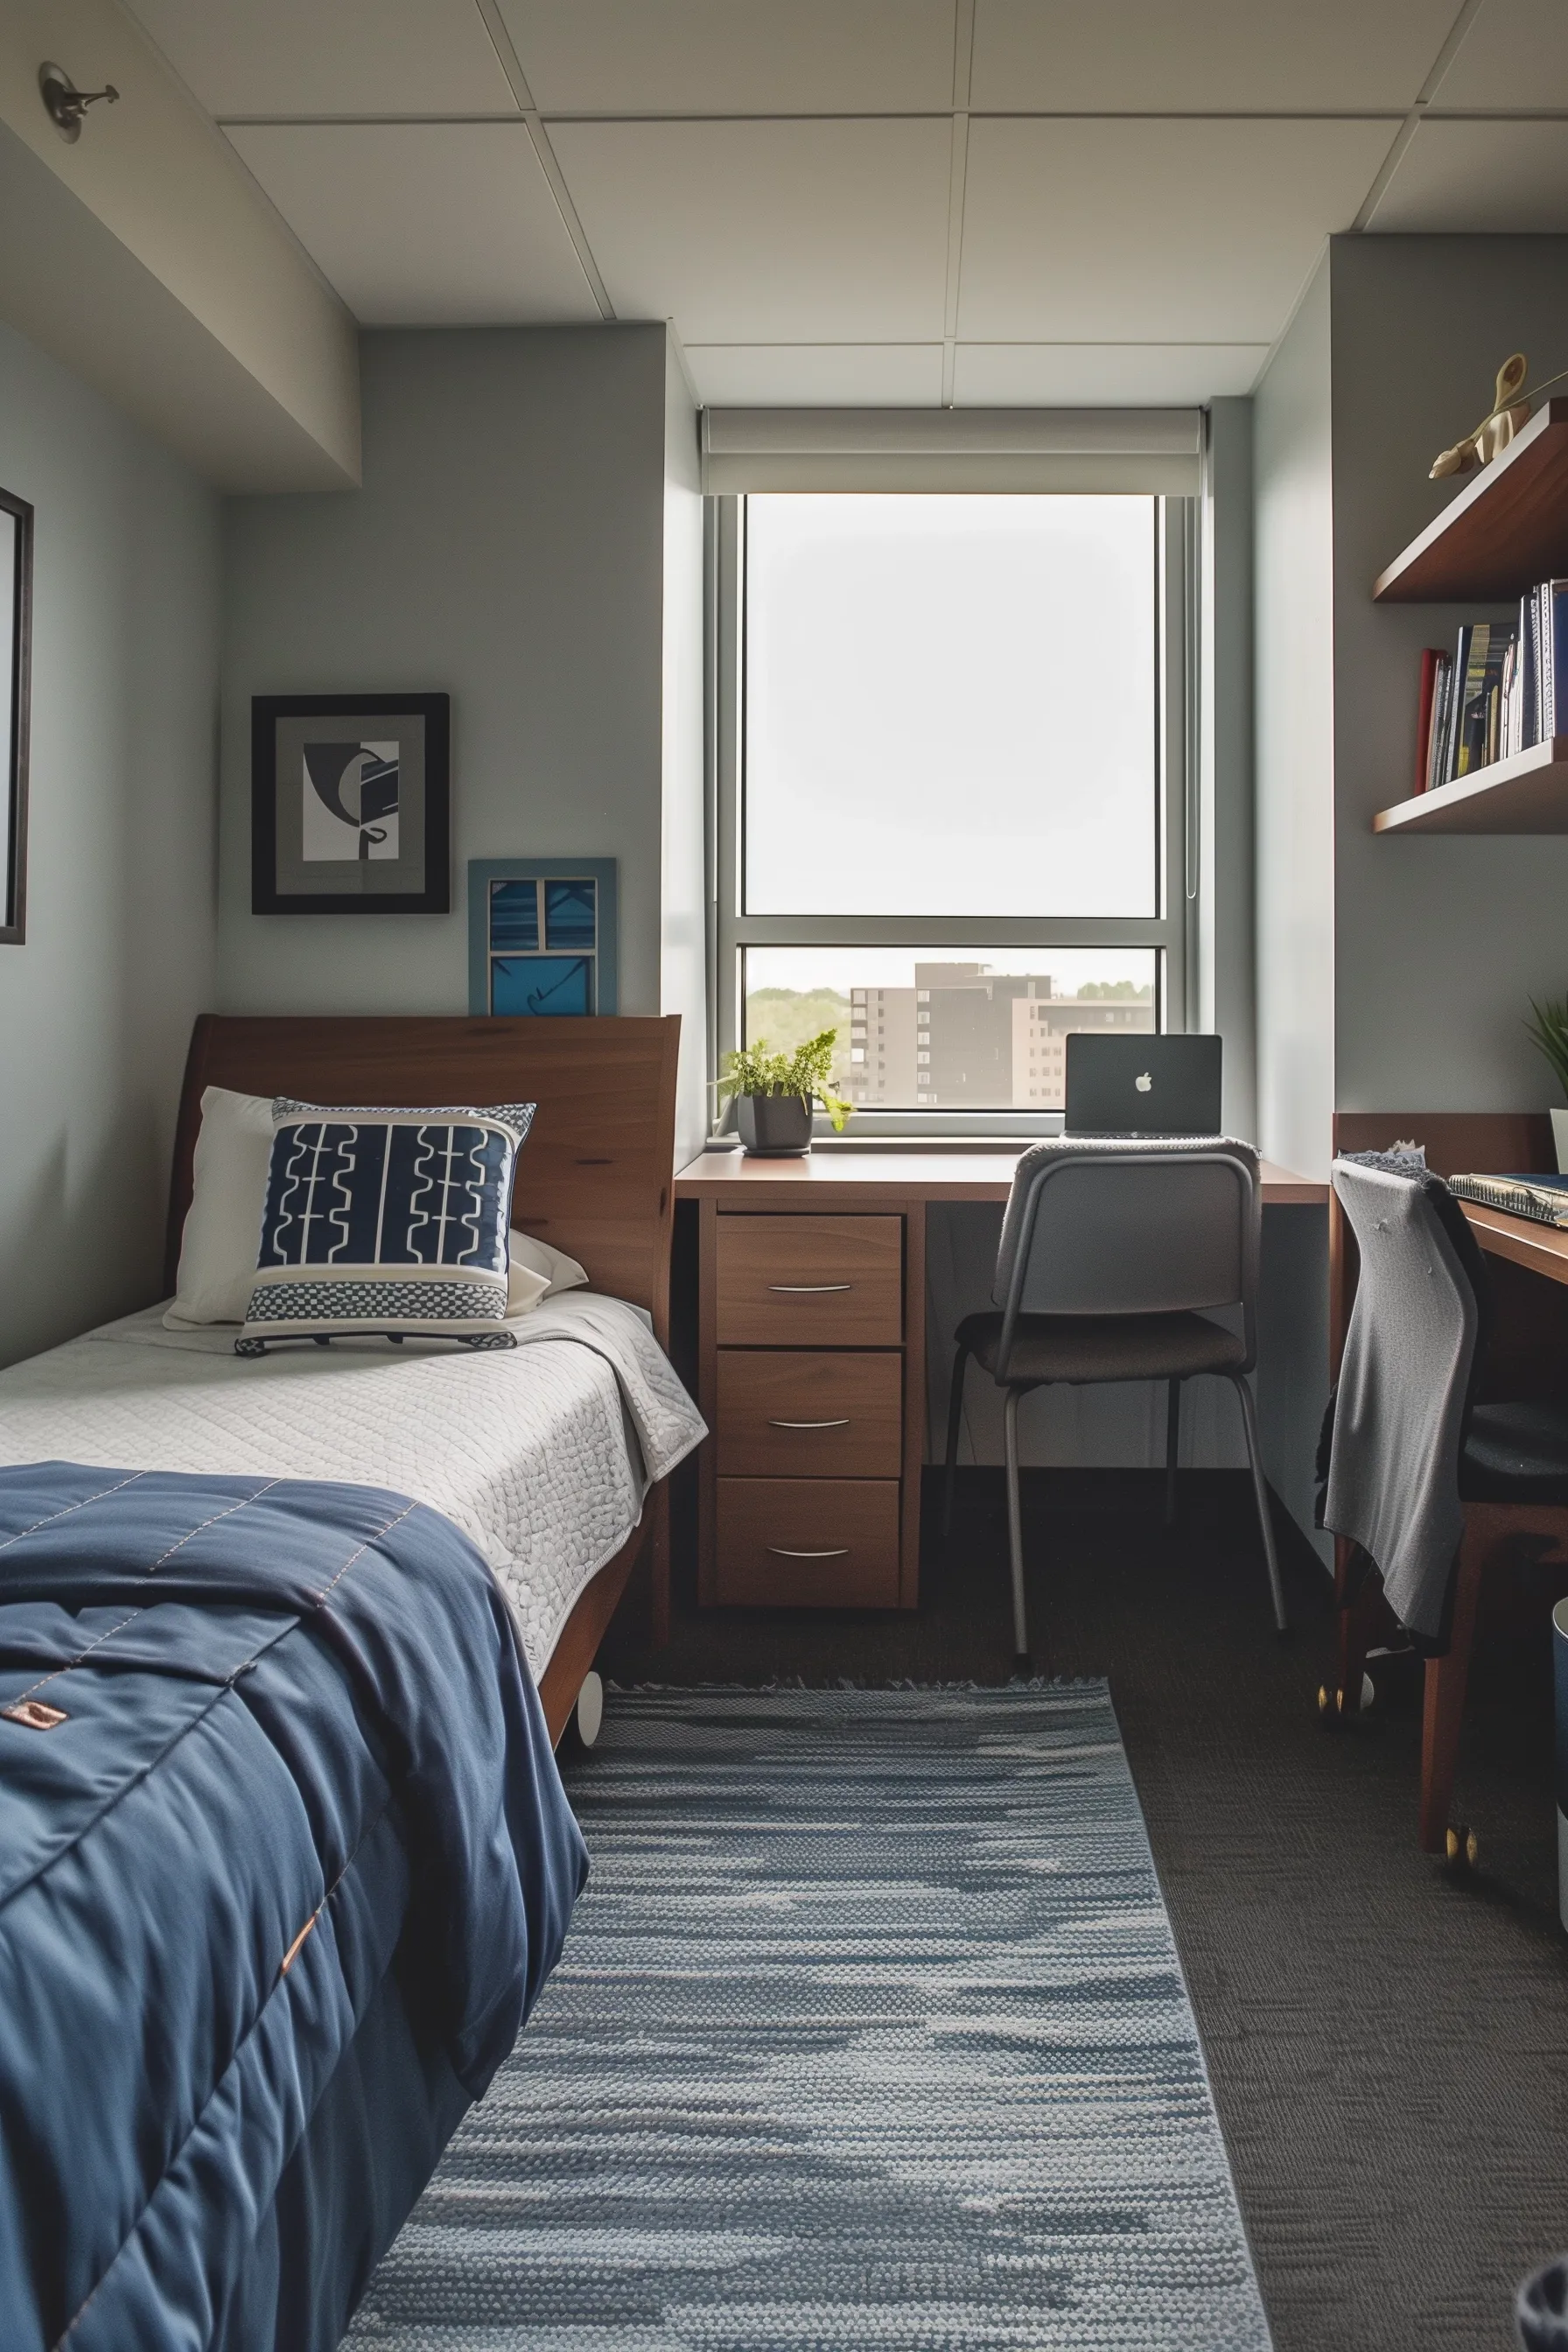 This dorm room features efficient storage solutions with storage cubes, and drawers. It also has an area rug.